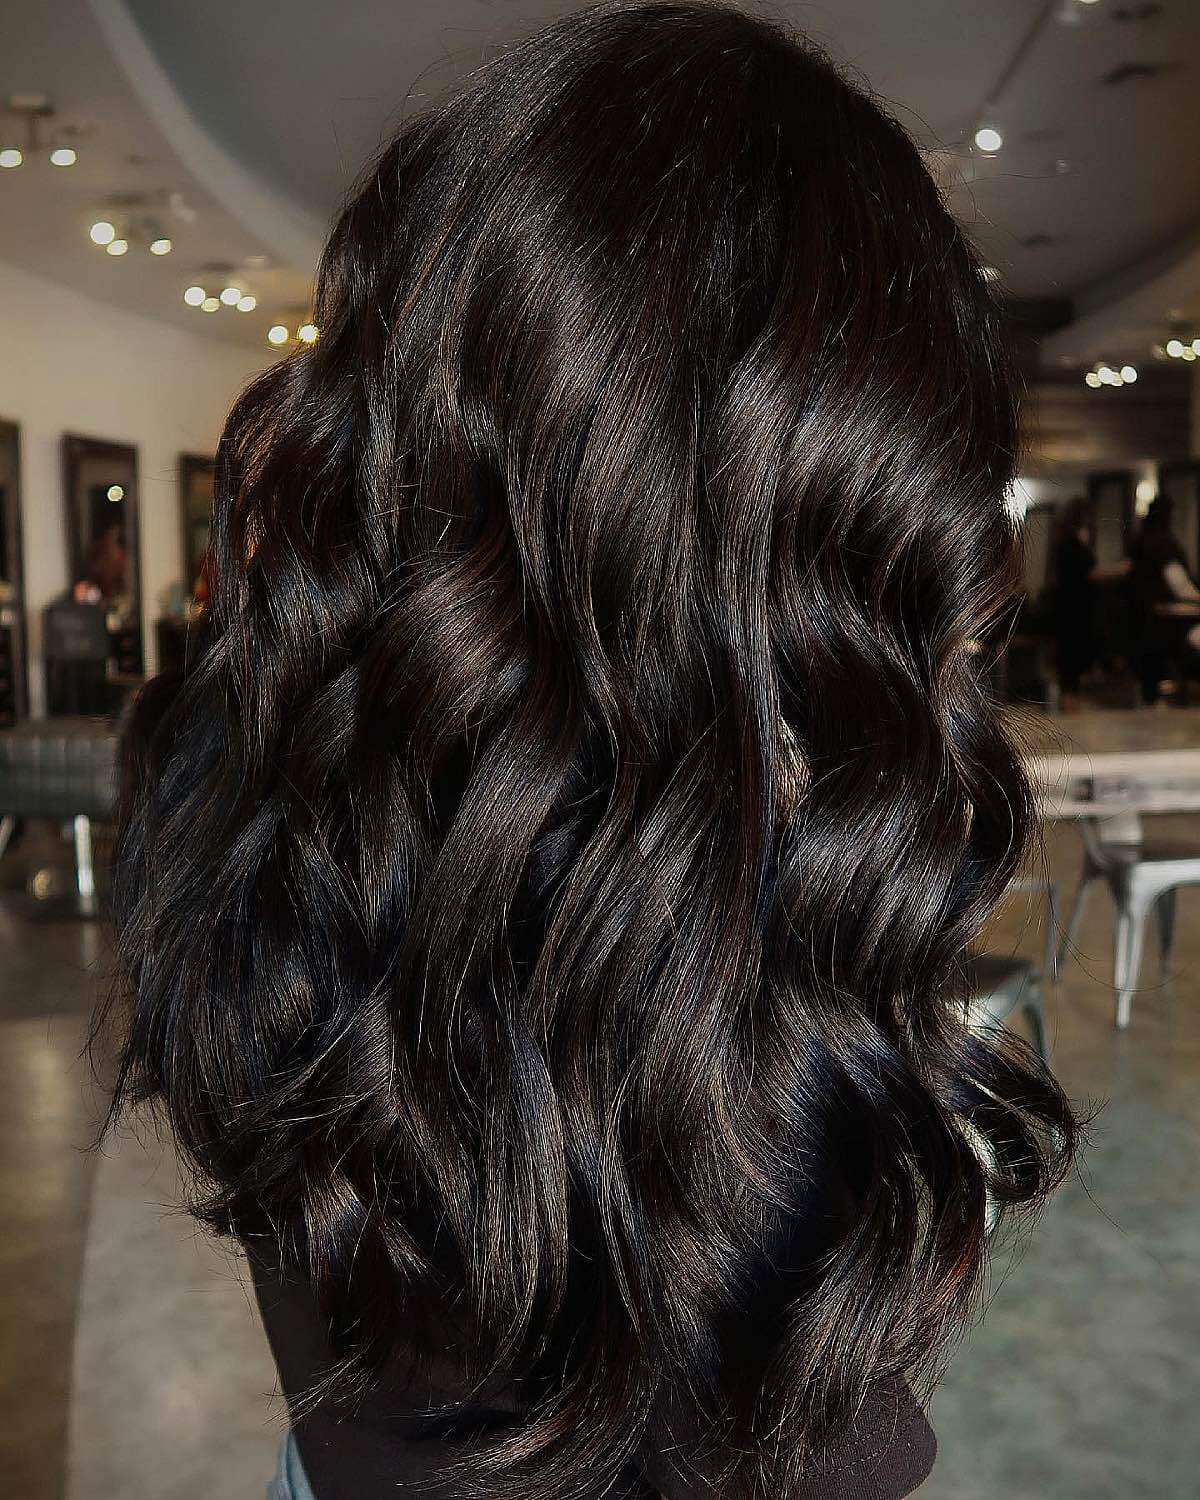 40+ Best Chocolate Brown Hair Color Ideas for Spring 2023